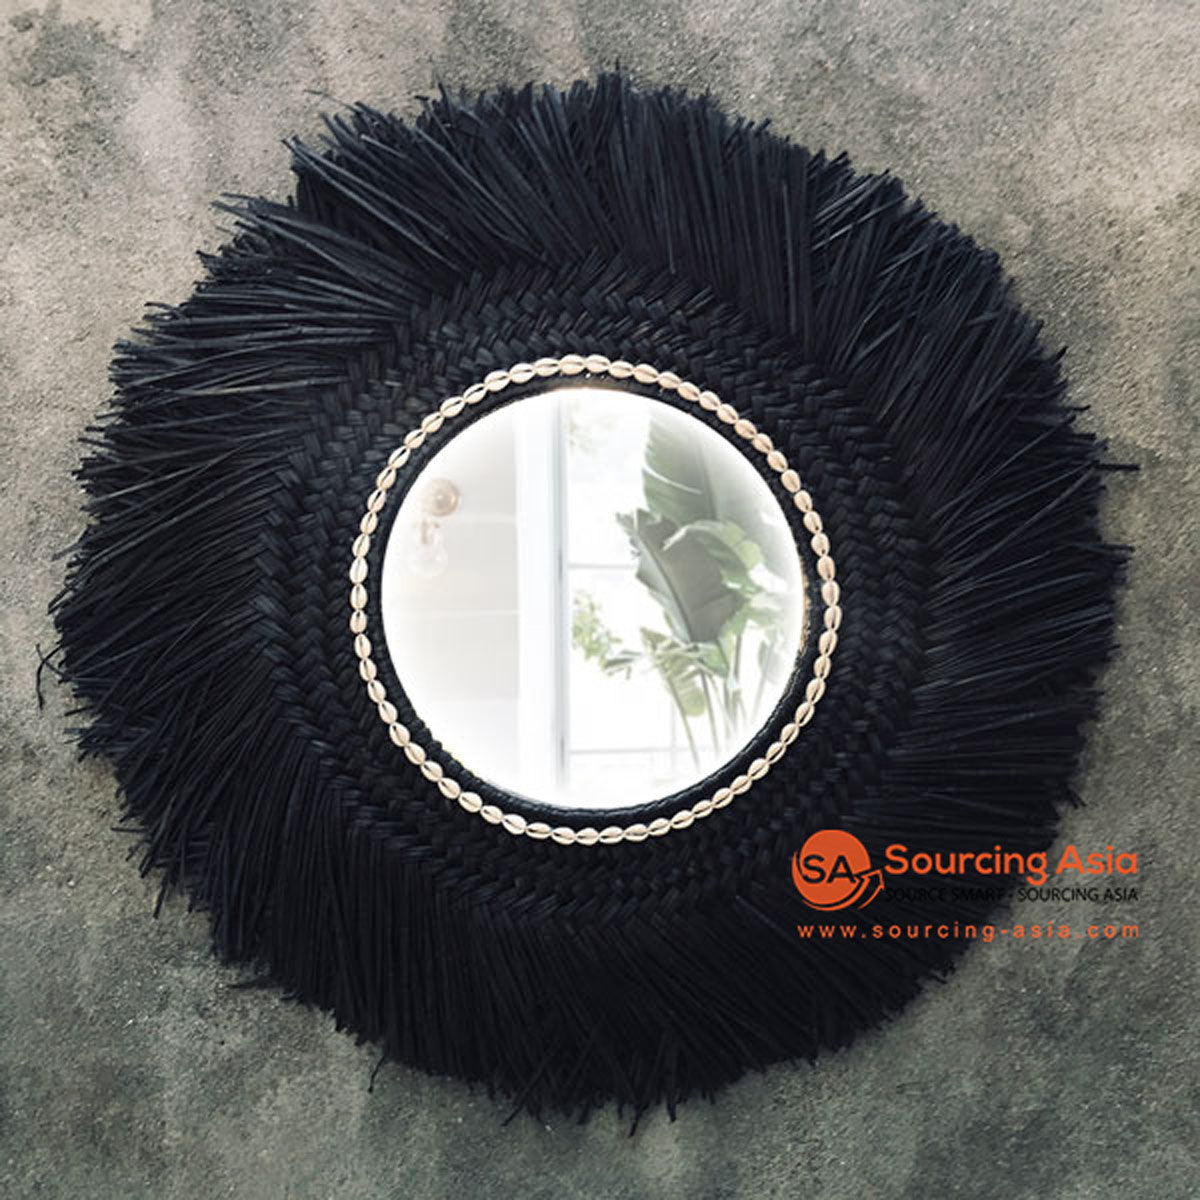 SHL065-4 BLACK SEAGRASS ROUND MIRROR WITH SHELL